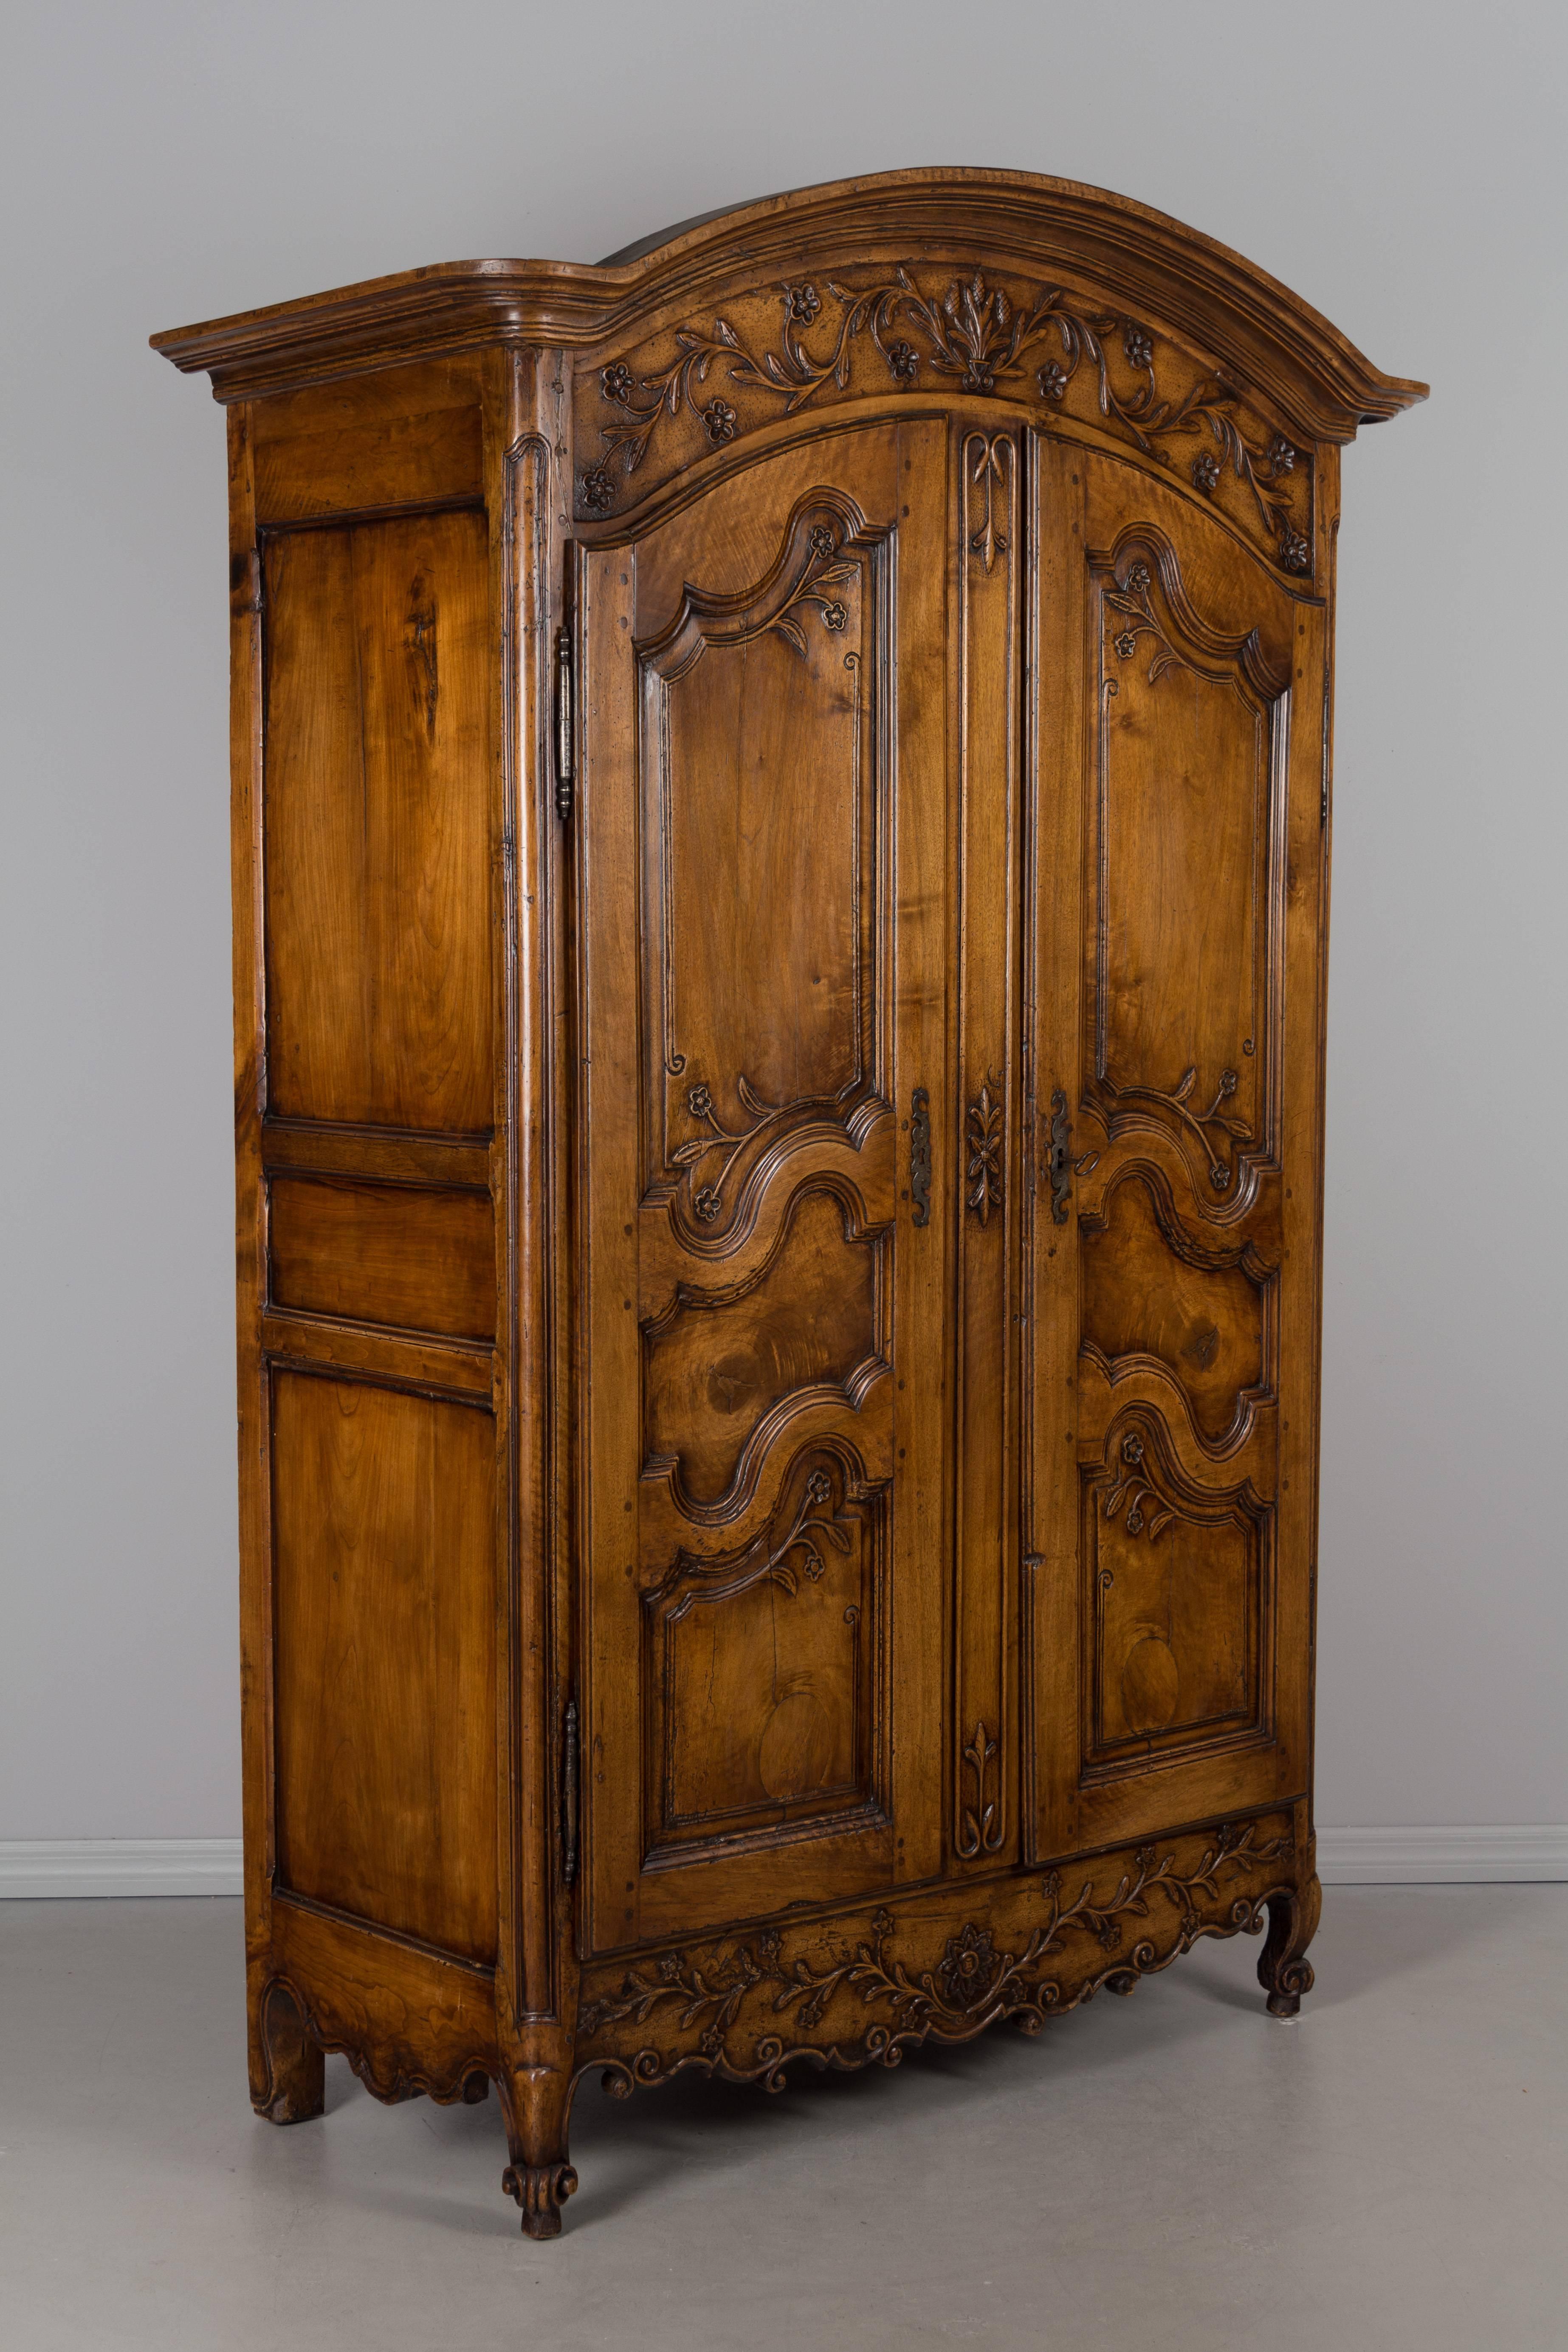 An 18th century Louis XV country French armoire from Burgundy, made of solid walnut and cherry with a chapeau de gendarme crown. Beautiful patterned knots in the wood are nicely framed on the three panels of each door. Floral vines, hand-carved in